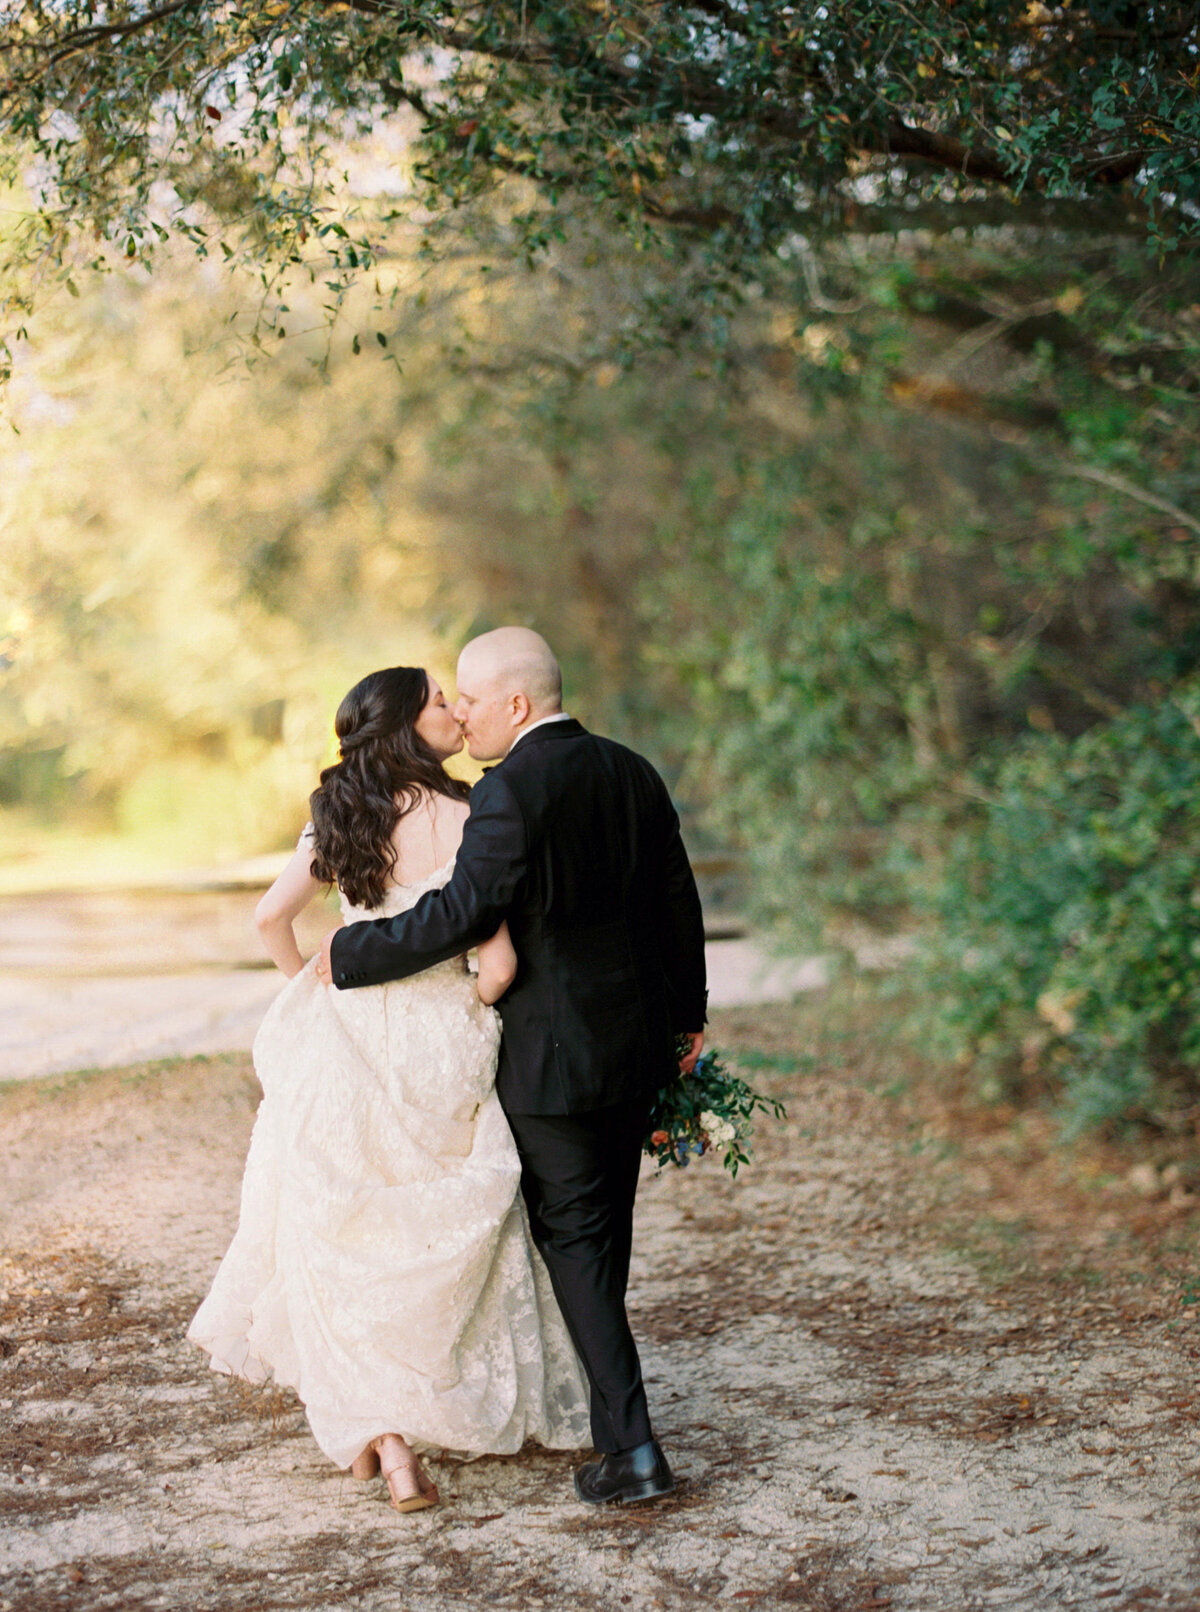 Bride and groom kiss as they walk down a tree lined path